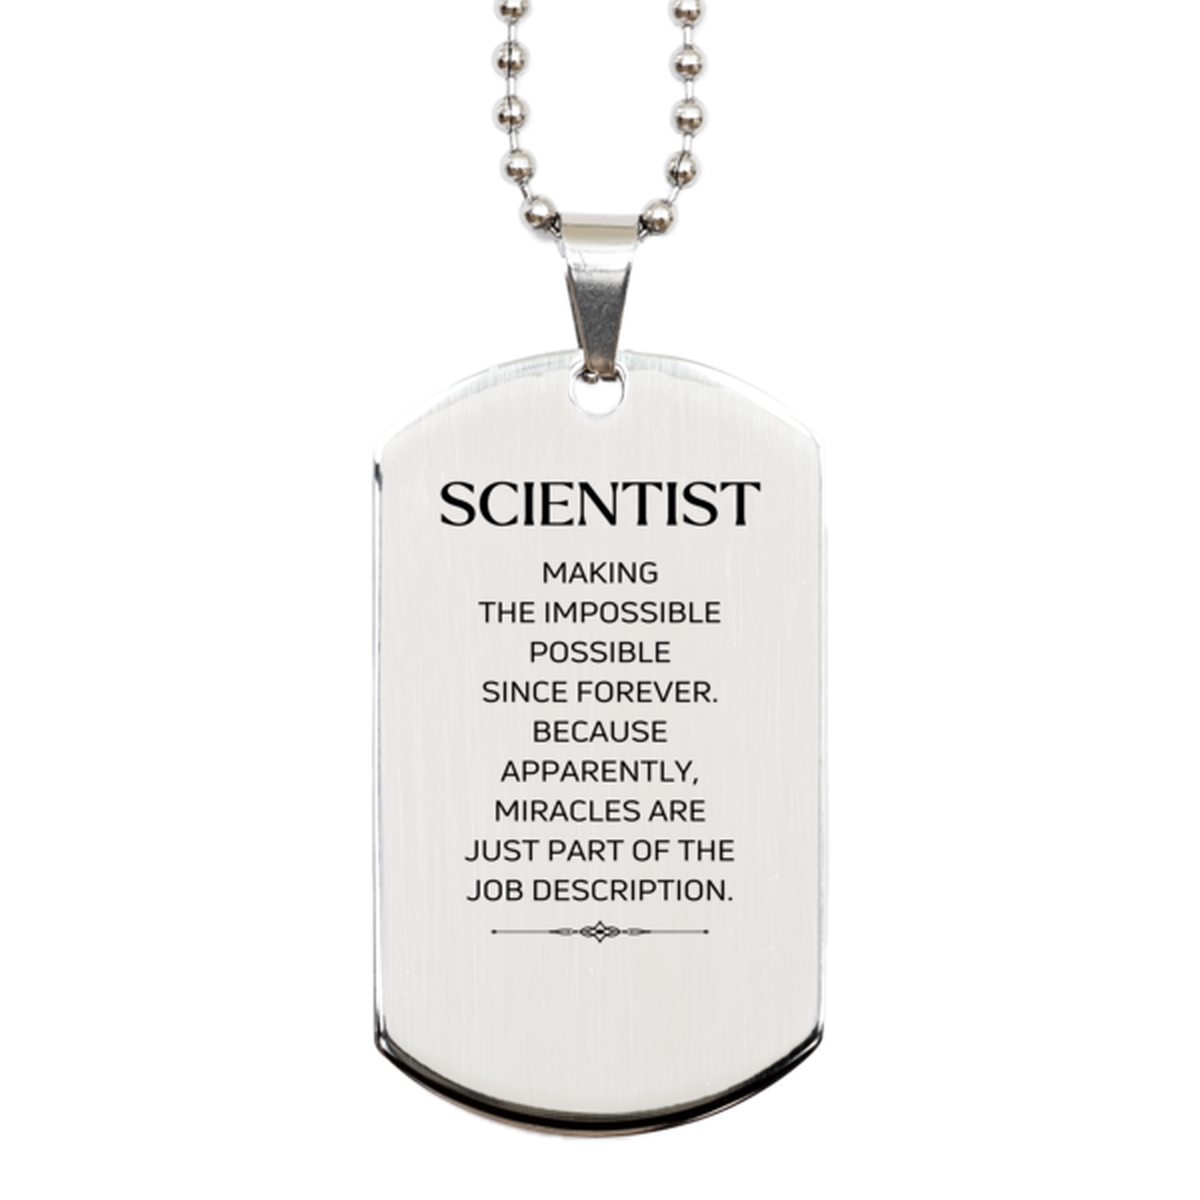 Funny Scientist Gifts, Miracles are just part of the job description, Inspirational Birthday Silver Dog Tag For Scientist, Men, Women, Coworkers, Friends, Boss